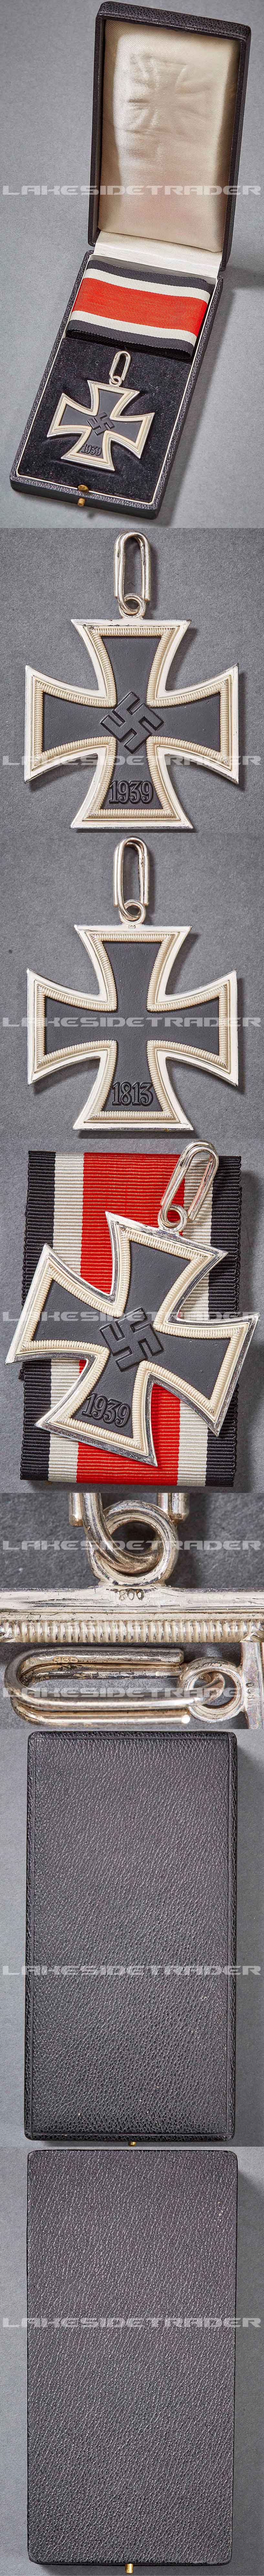 Knights Cross Iron Cross by Steinhauer & Luck in Issue Case